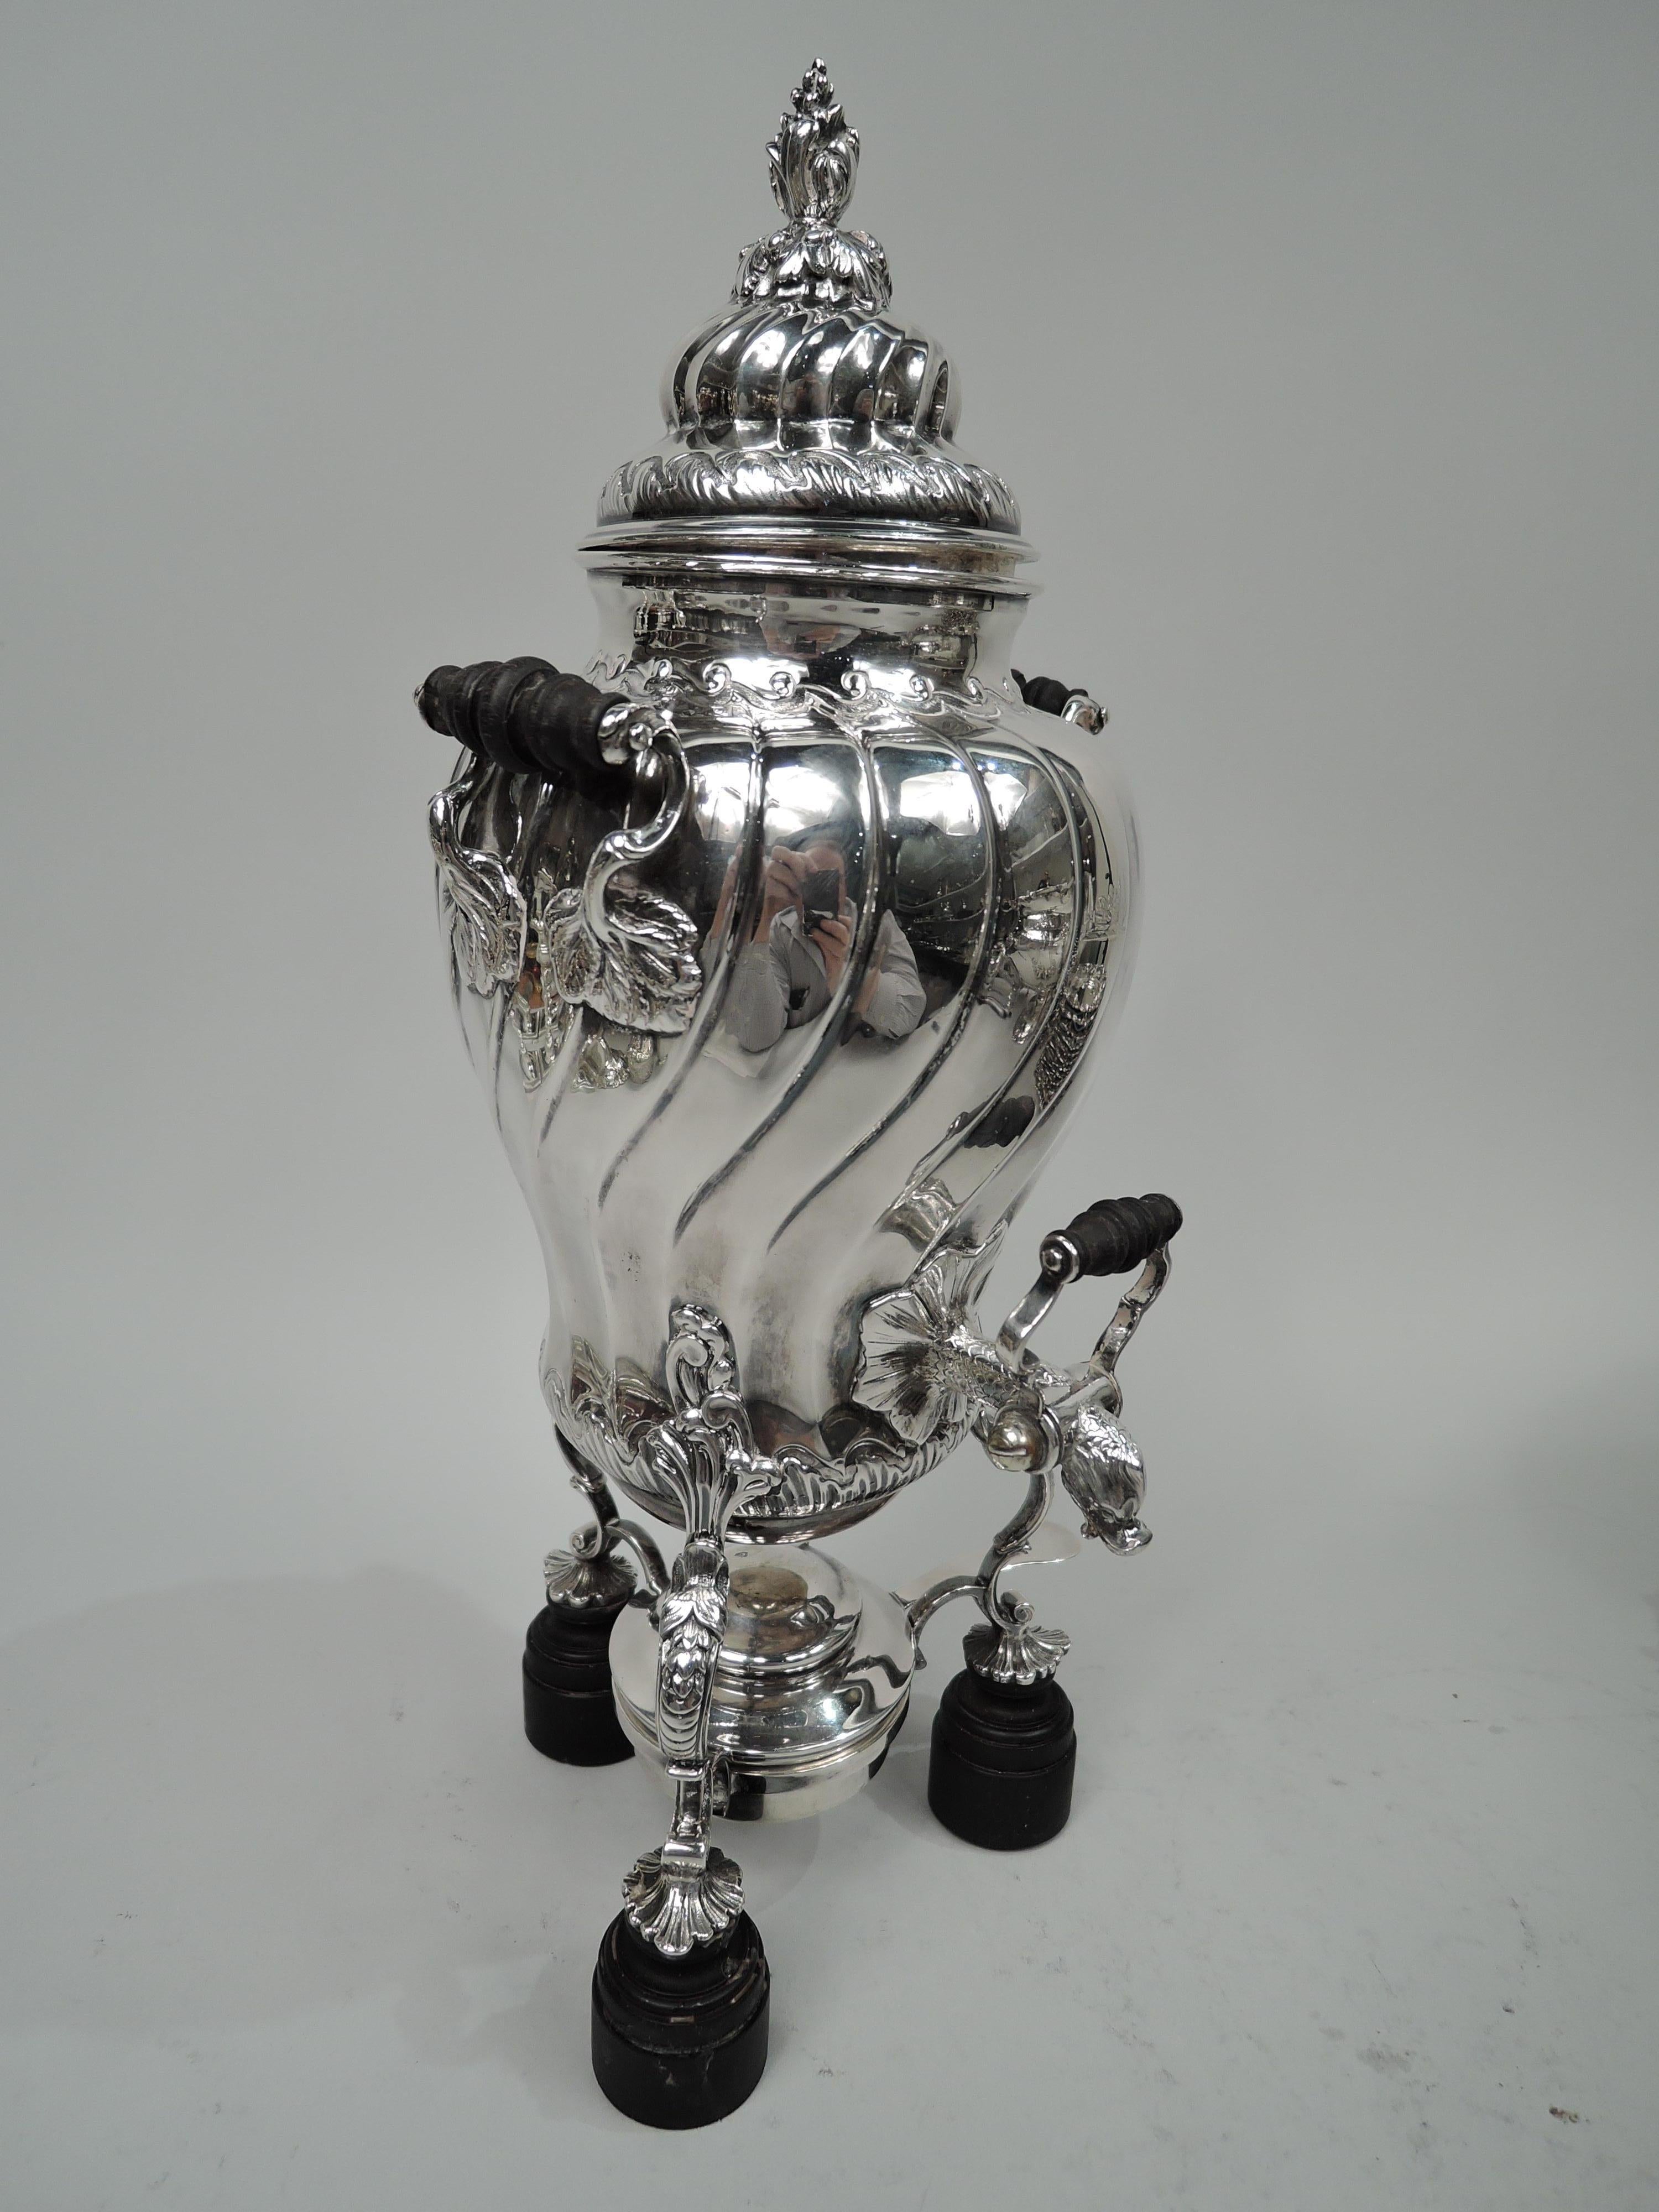 French Belle Epoque classical 950 silver tea urn, ca 1900. Ovoid with turned stained-wood handles with silver scroll and leaf mounts. Scaly fish spout with tail mount and gaping mouth spout and turned stained wood and silver scroll tap. Double-domed